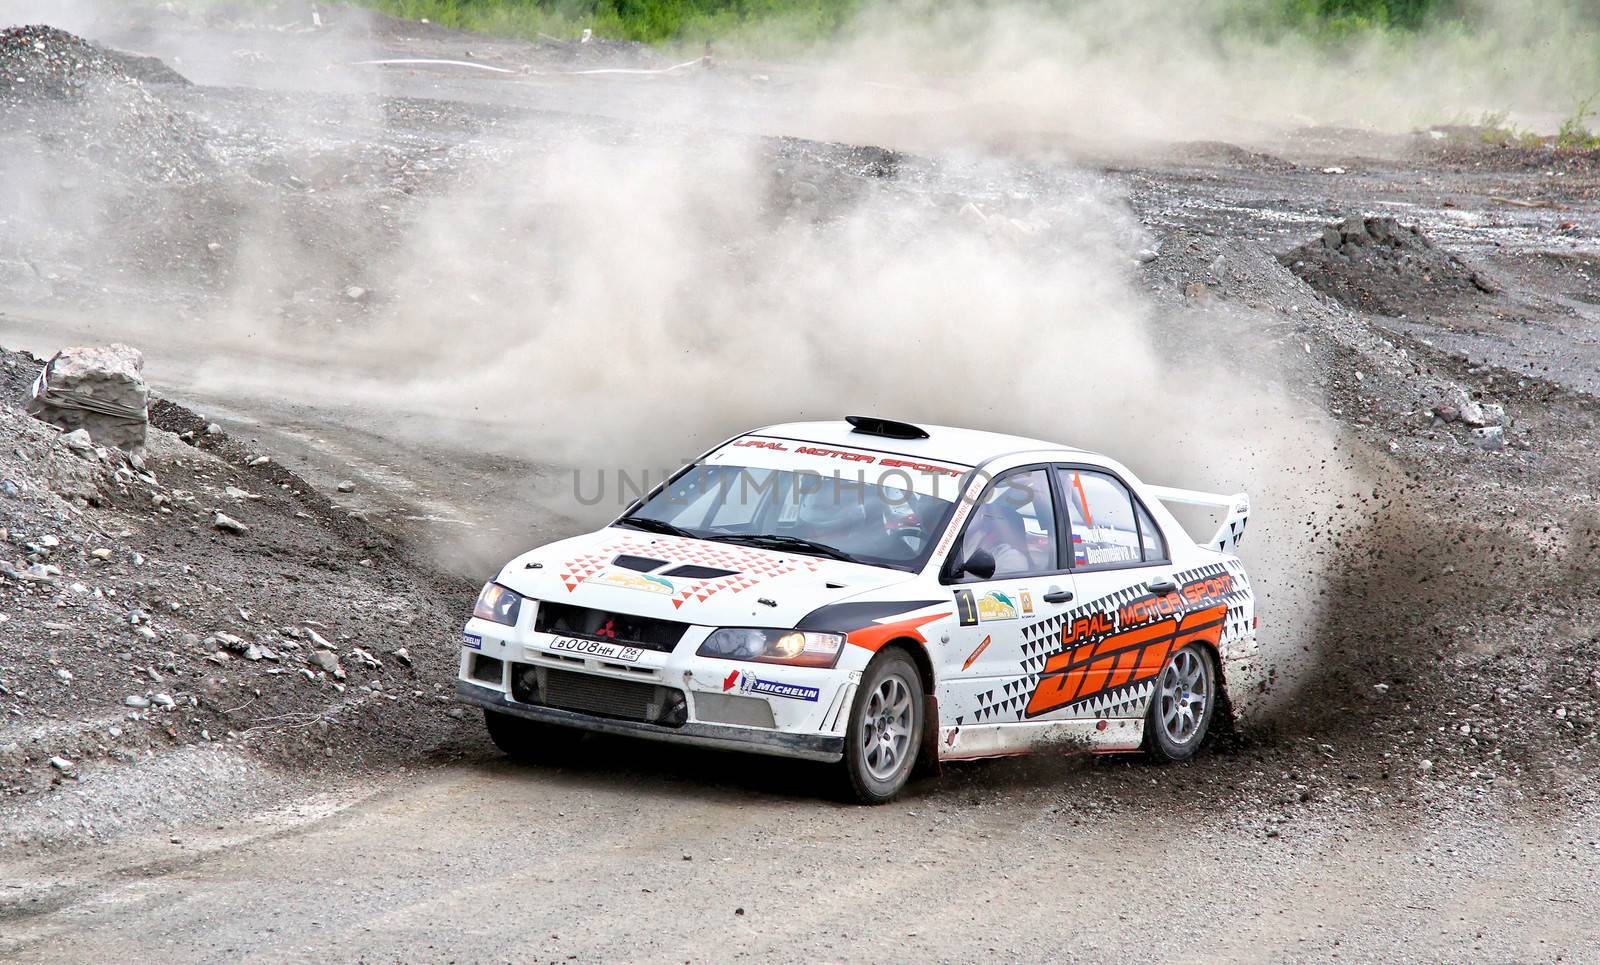 BAKAL, RUSSIA - JULY 21: Andrey Trukhin's Mitsubishi Lancer Evo VII (No. 1) competes at the annual Rally Southern Ural on July 21, 2012 in Bakal, Satka district, Chelyabinsk region, Russia.